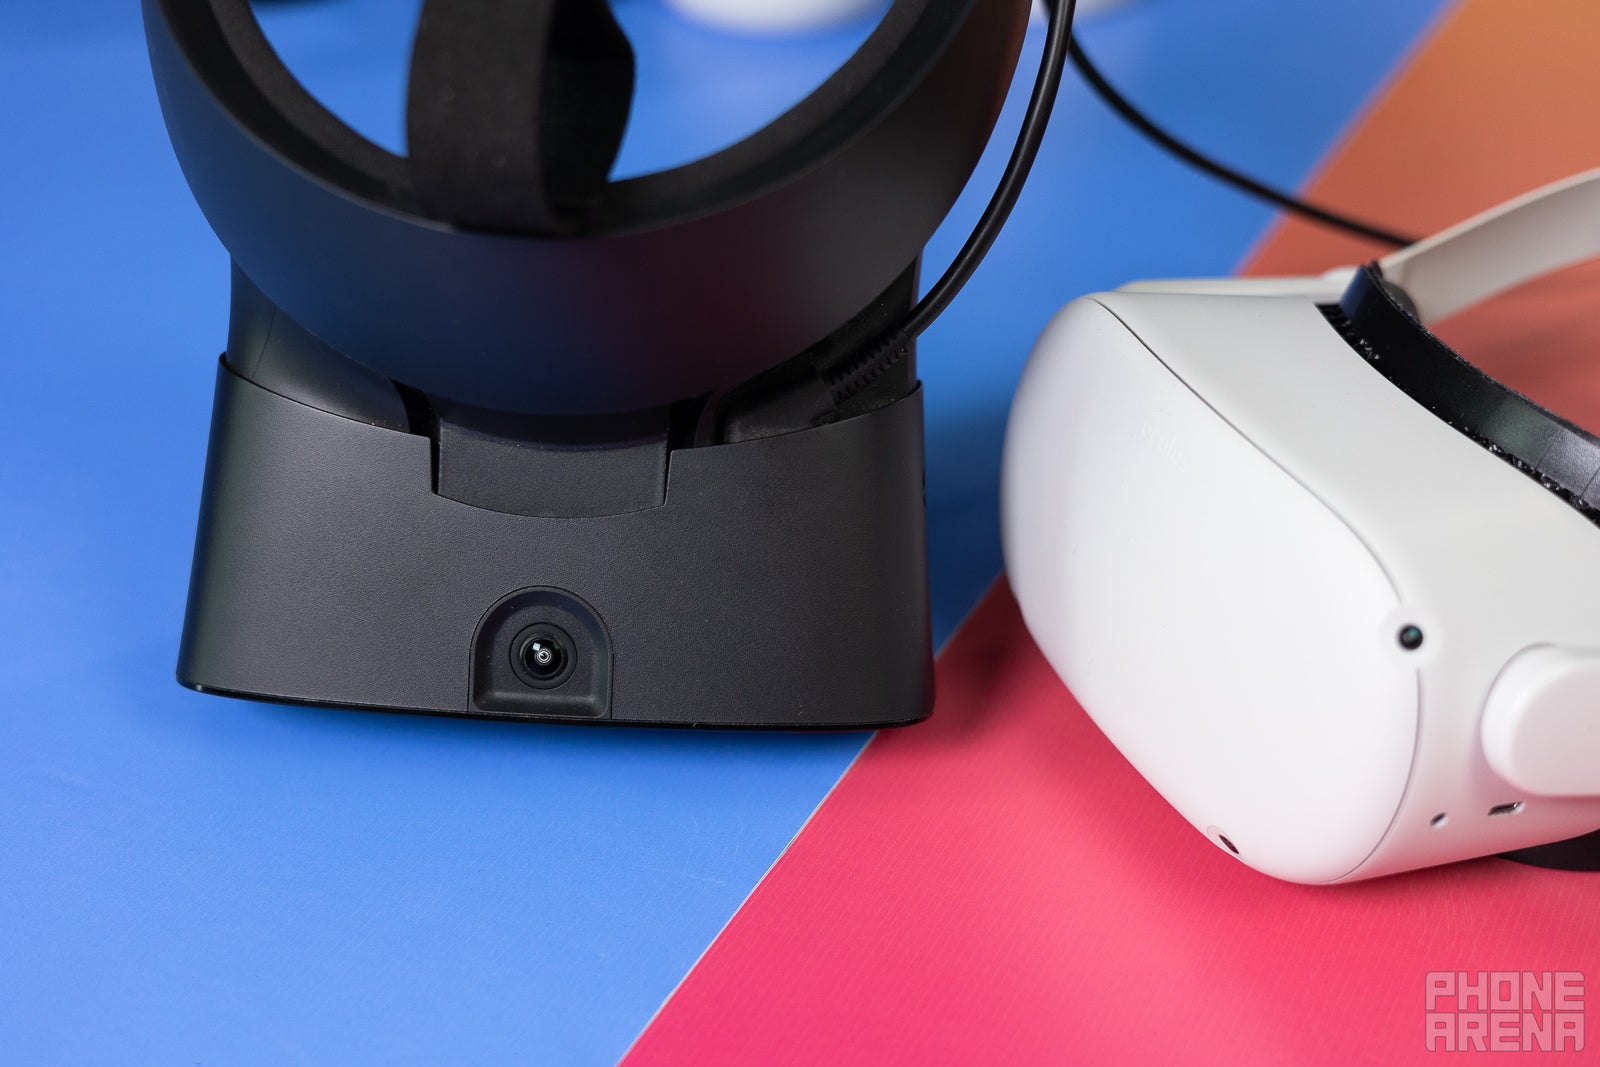 (Image Credit - PhoneArena) The Rift S (left) has a fifth camera on top, while the Quest 2 (right) only has 4 corner cameras - Meta Quest 2 vs Oculus Rift S: Which one should you buy? The standalone VR headset or the PCVR-only